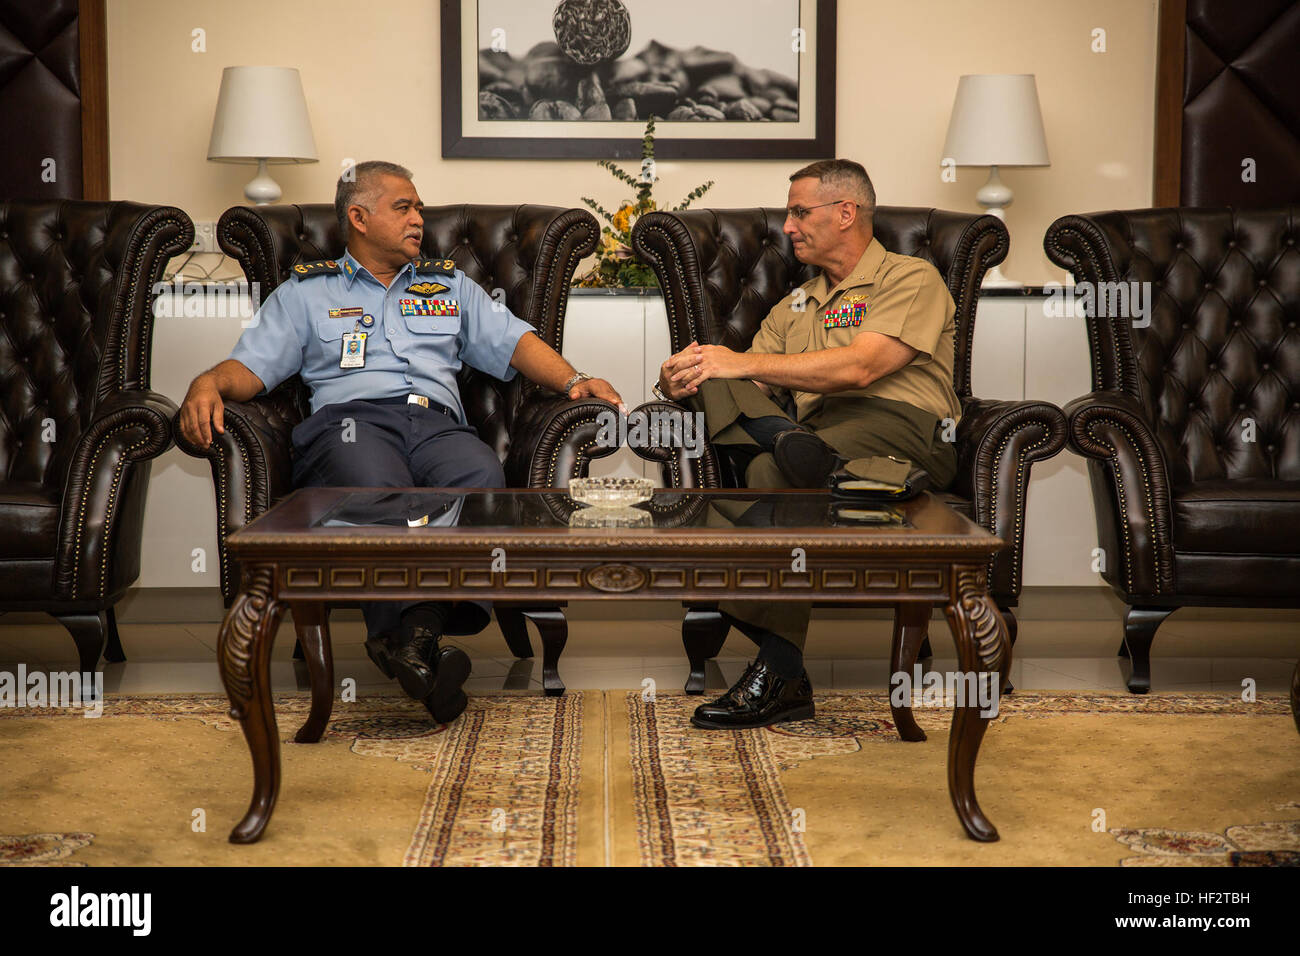 Brigadier Gen. C. J. Mahoney, deputy commander of U.S. Marine Corps Forces, Pacific (right), and Royal Malaysian Air Force Maj. Gen. Dato' Kamalruzaman Mohd Othman assistant chief of staff of the Defence Planning Division of the Malaysian Armed Forces, discuss Bersama Warrior 2015 moments before the exercise's opening ceremony at the Malaysian Armed Forces Headquarters, in Kuala Lumpur, Malaysia, Jan. 22, 2015. The leaders later spoke during the opening ceremony and explained their expectations for the exercise, which is aimed at utilizing combined planning groups to help solve real world scen Stock Photo